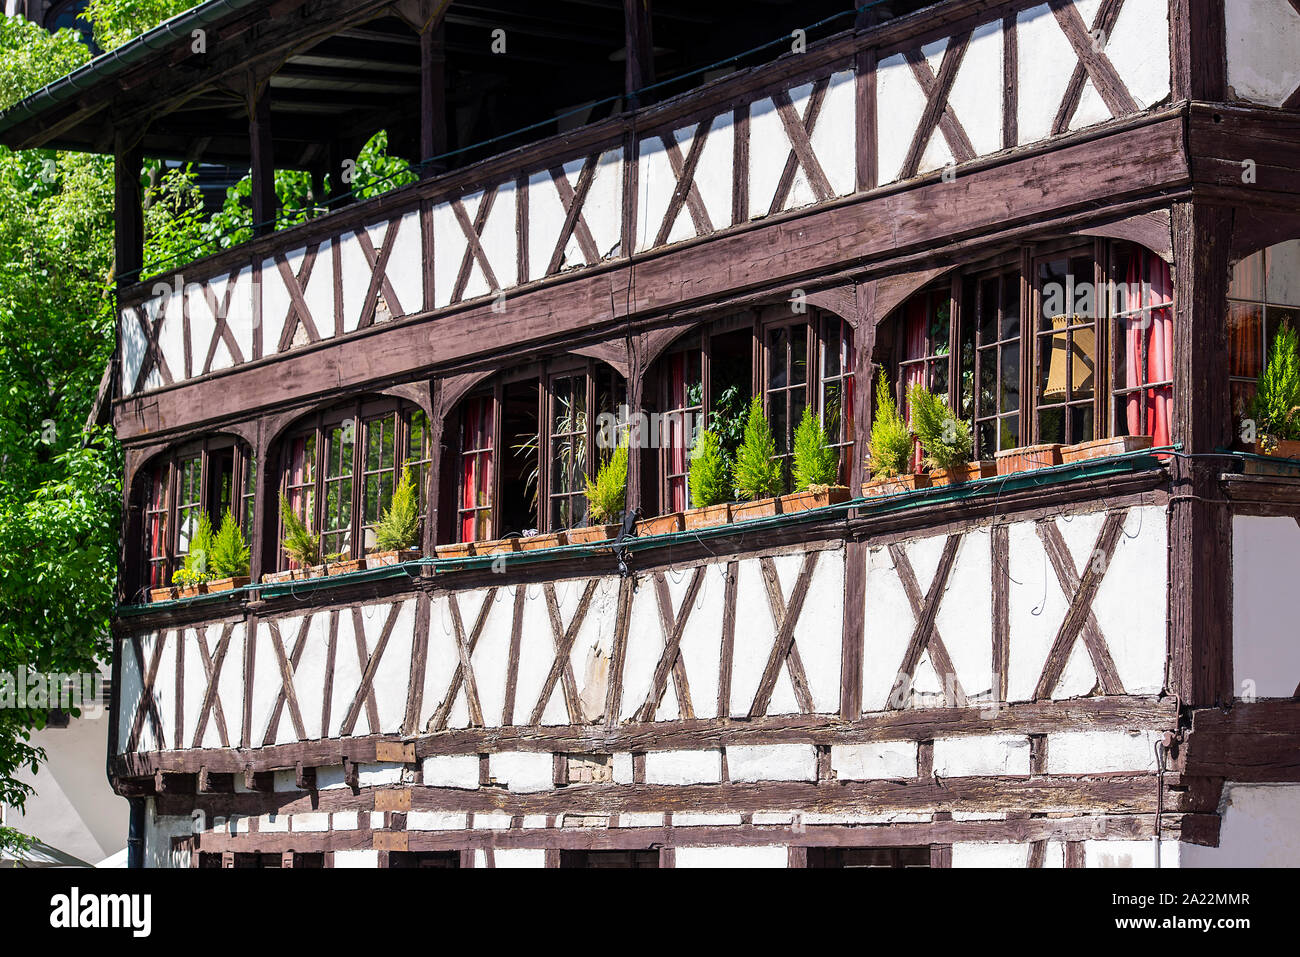 Part of an old fachwerk medieval wooden House with Balcony and Windows Stock Photo